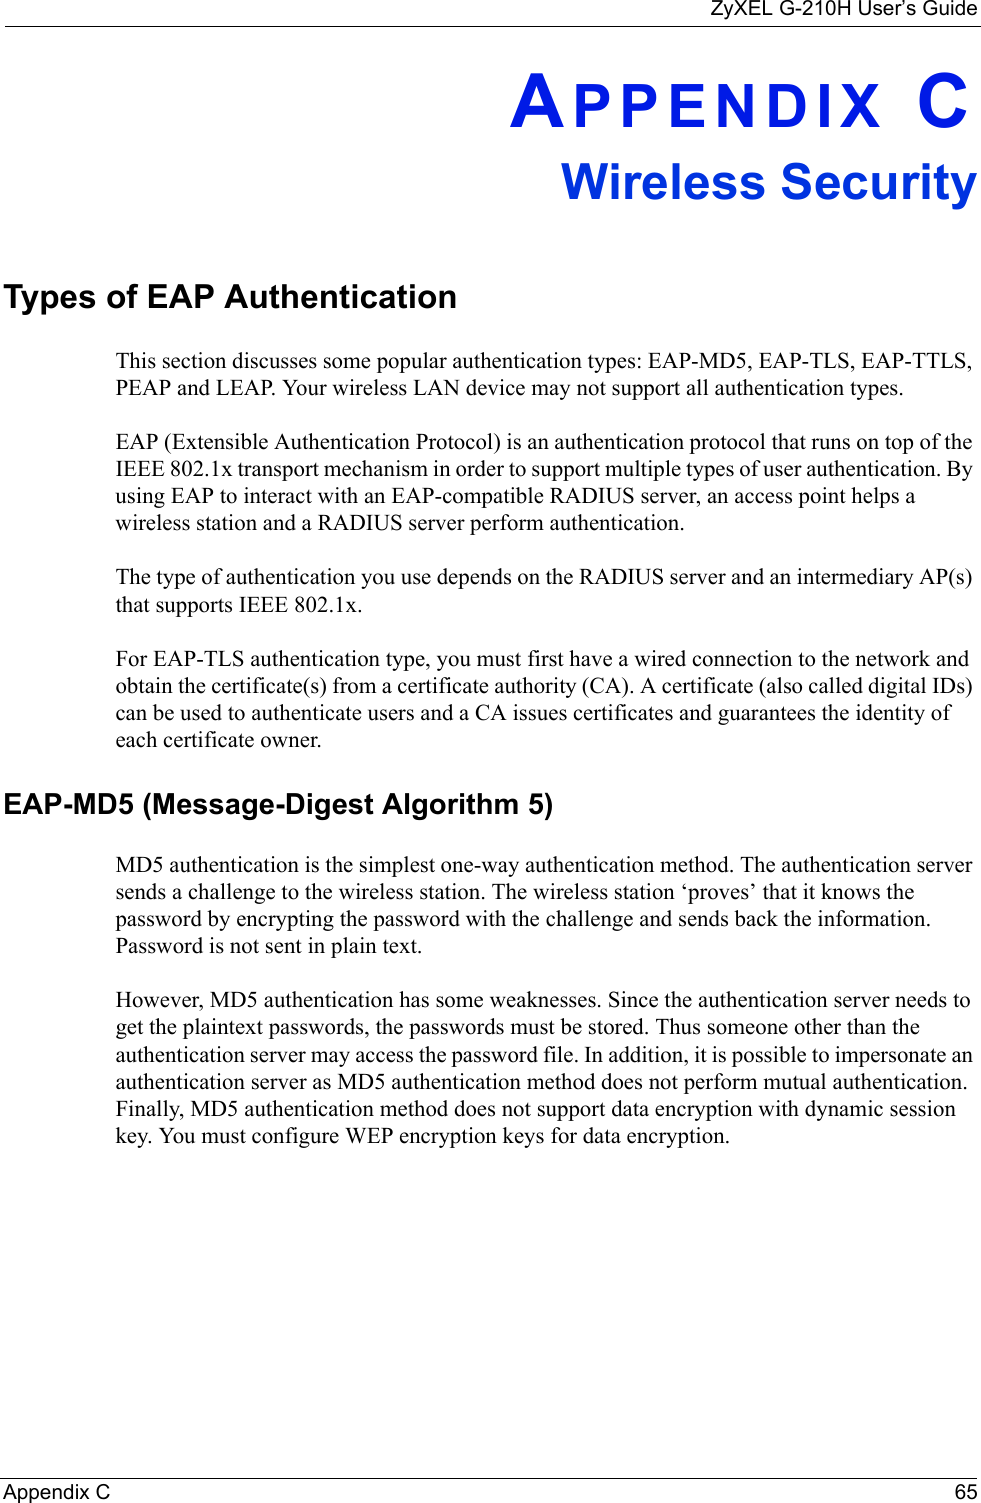 ZyXEL G-210H User’s GuideAppendix C 65APPENDIX CWireless SecurityTypes of EAP AuthenticationThis section discusses some popular authentication types: EAP-MD5, EAP-TLS, EAP-TTLS, PEAP and LEAP. Your wireless LAN device may not support all authentication types. EAP (Extensible Authentication Protocol) is an authentication protocol that runs on top of the IEEE 802.1x transport mechanism in order to support multiple types of user authentication. By using EAP to interact with an EAP-compatible RADIUS server, an access point helps a wireless station and a RADIUS server perform authentication. The type of authentication you use depends on the RADIUS server and an intermediary AP(s) that supports IEEE 802.1x.For EAP-TLS authentication type, you must first have a wired connection to the network and obtain the certificate(s) from a certificate authority (CA). A certificate (also called digital IDs) can be used to authenticate users and a CA issues certificates and guarantees the identity of each certificate owner.EAP-MD5 (Message-Digest Algorithm 5)MD5 authentication is the simplest one-way authentication method. The authentication server sends a challenge to the wireless station. The wireless station ‘proves’ that it knows the password by encrypting the password with the challenge and sends back the information. Password is not sent in plain text. However, MD5 authentication has some weaknesses. Since the authentication server needs to get the plaintext passwords, the passwords must be stored. Thus someone other than the authentication server may access the password file. In addition, it is possible to impersonate an authentication server as MD5 authentication method does not perform mutual authentication. Finally, MD5 authentication method does not support data encryption with dynamic session key. You must configure WEP encryption keys for data encryption. 